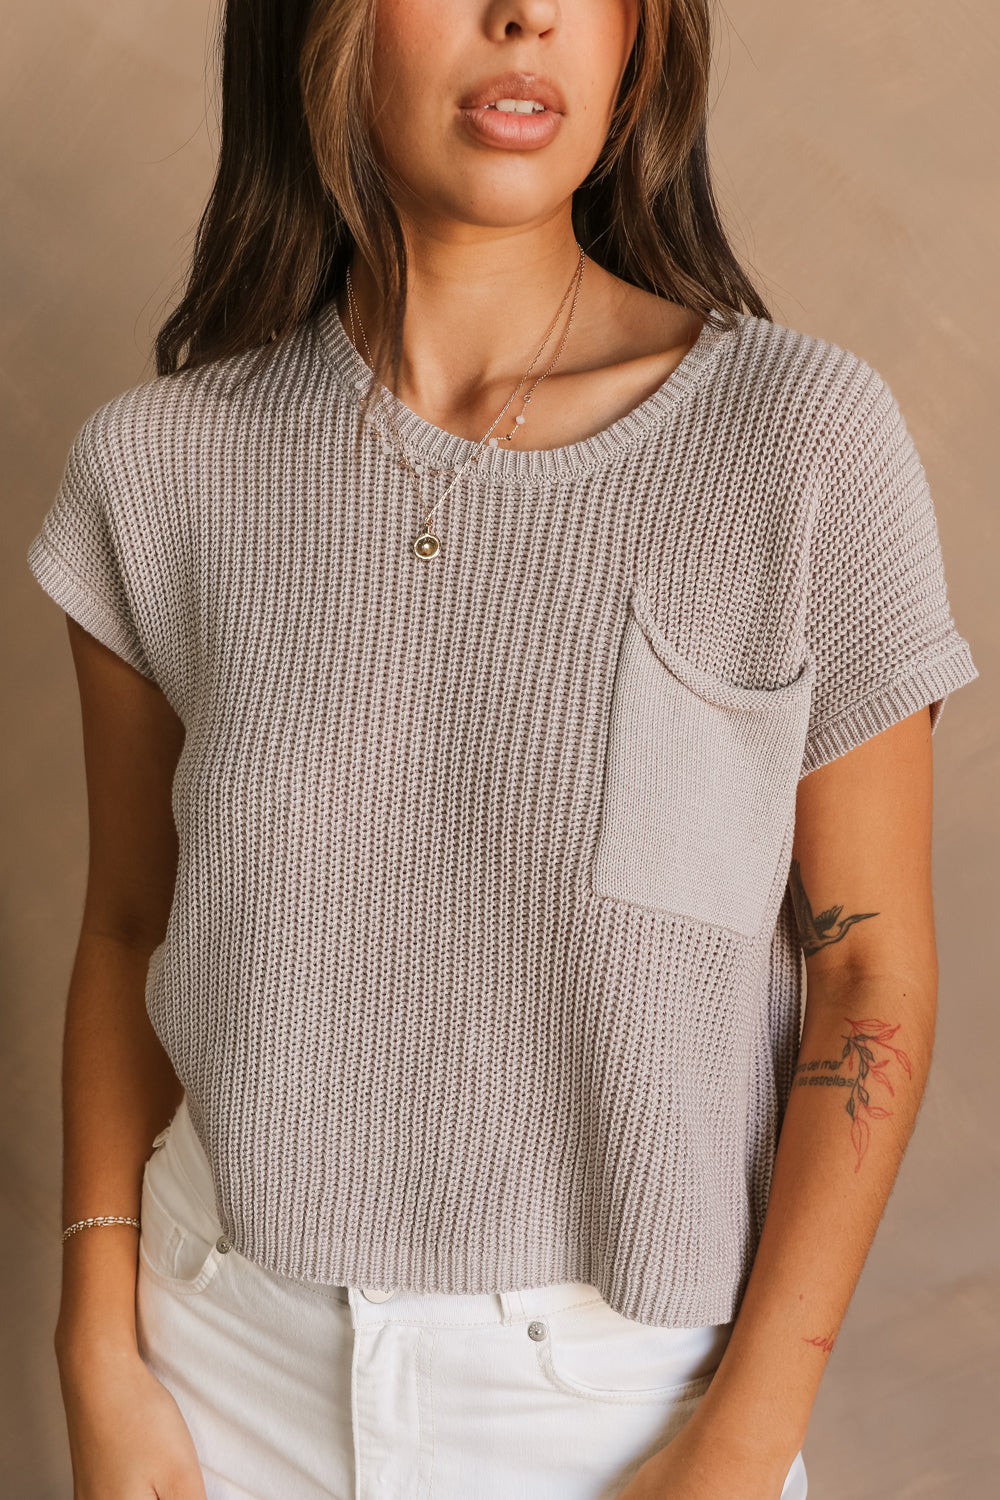 Close up view of female model wearing the Harper Grey Knit Short Sleeve Top which features Grey Small Cable Knit Fabric, Left Front Chest Pocket, Round Neckline and Short Sleeves